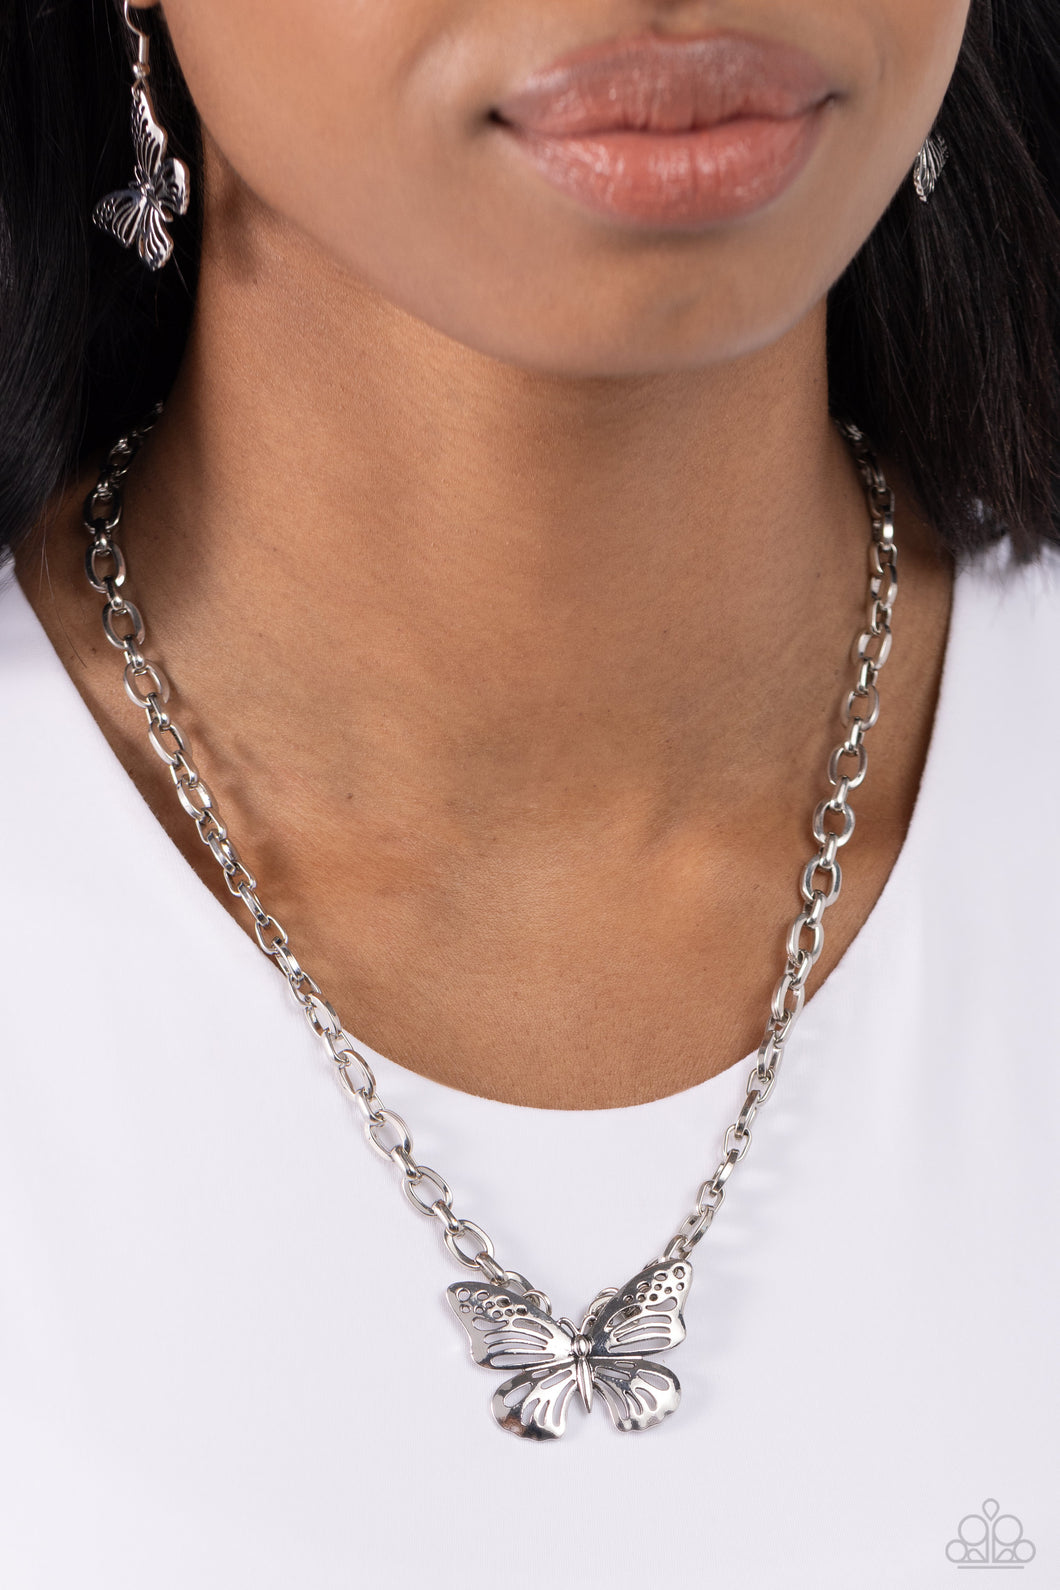 Midair Monochromatic- Silver Necklace 1082n